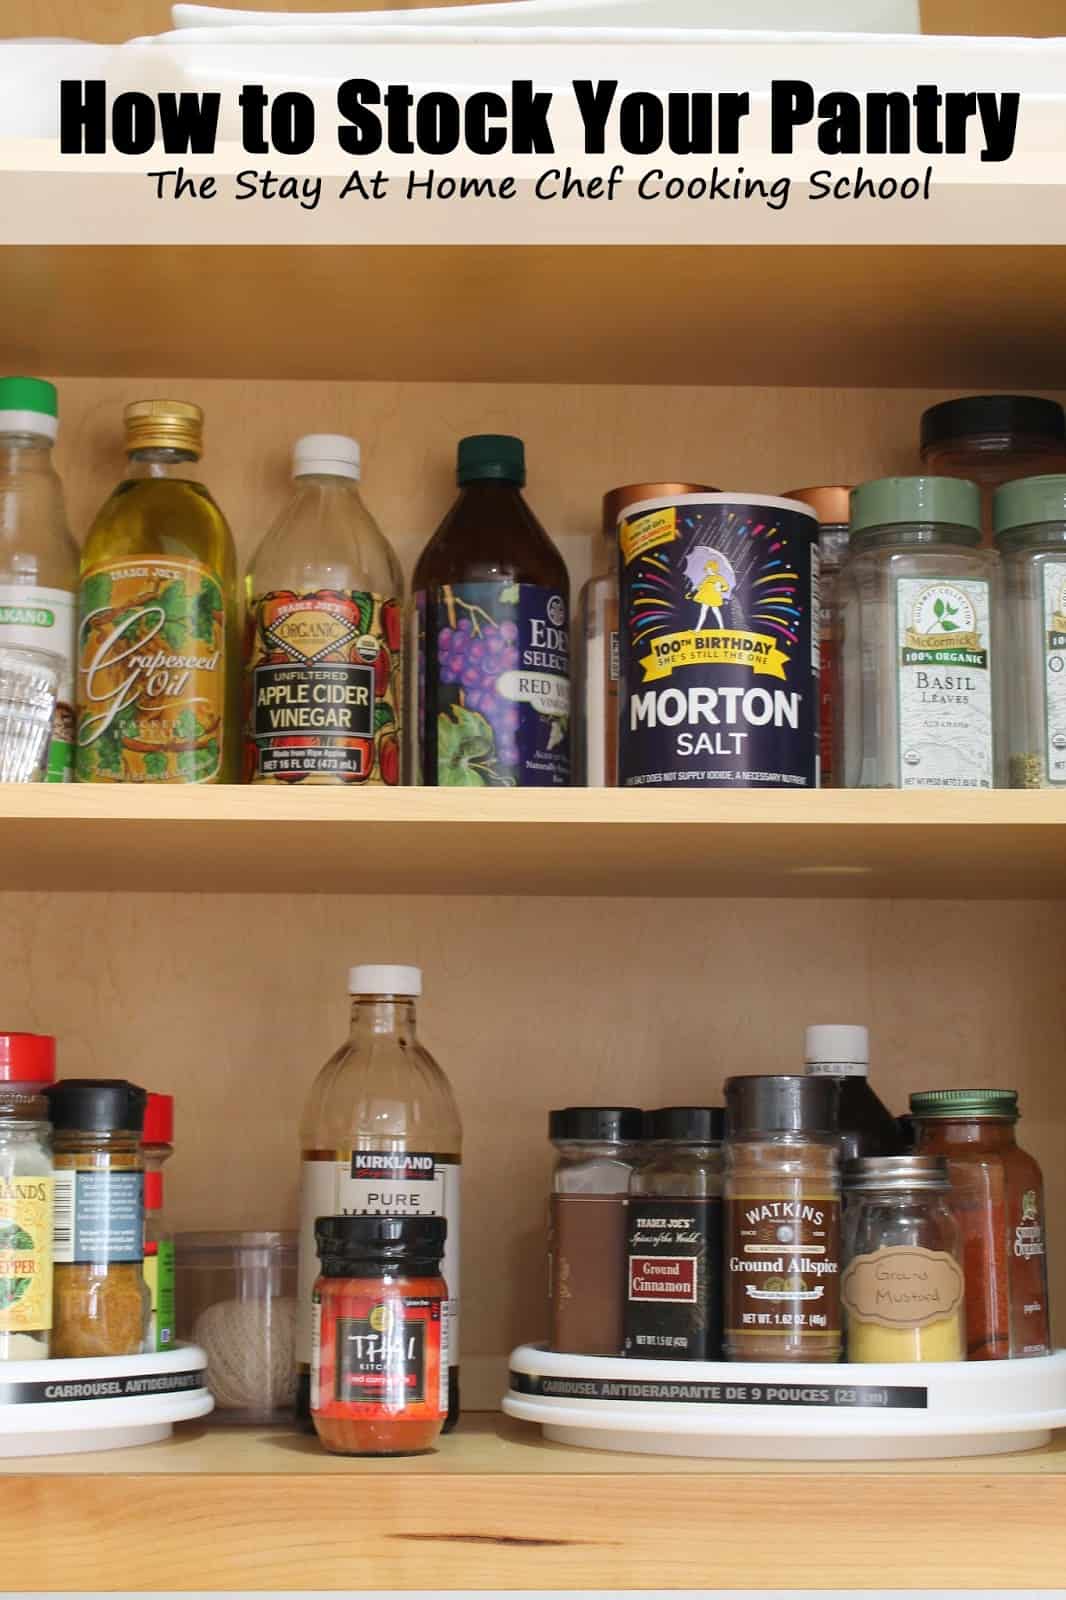 How to Stock Your Pantry: A Guide for the Home Cook